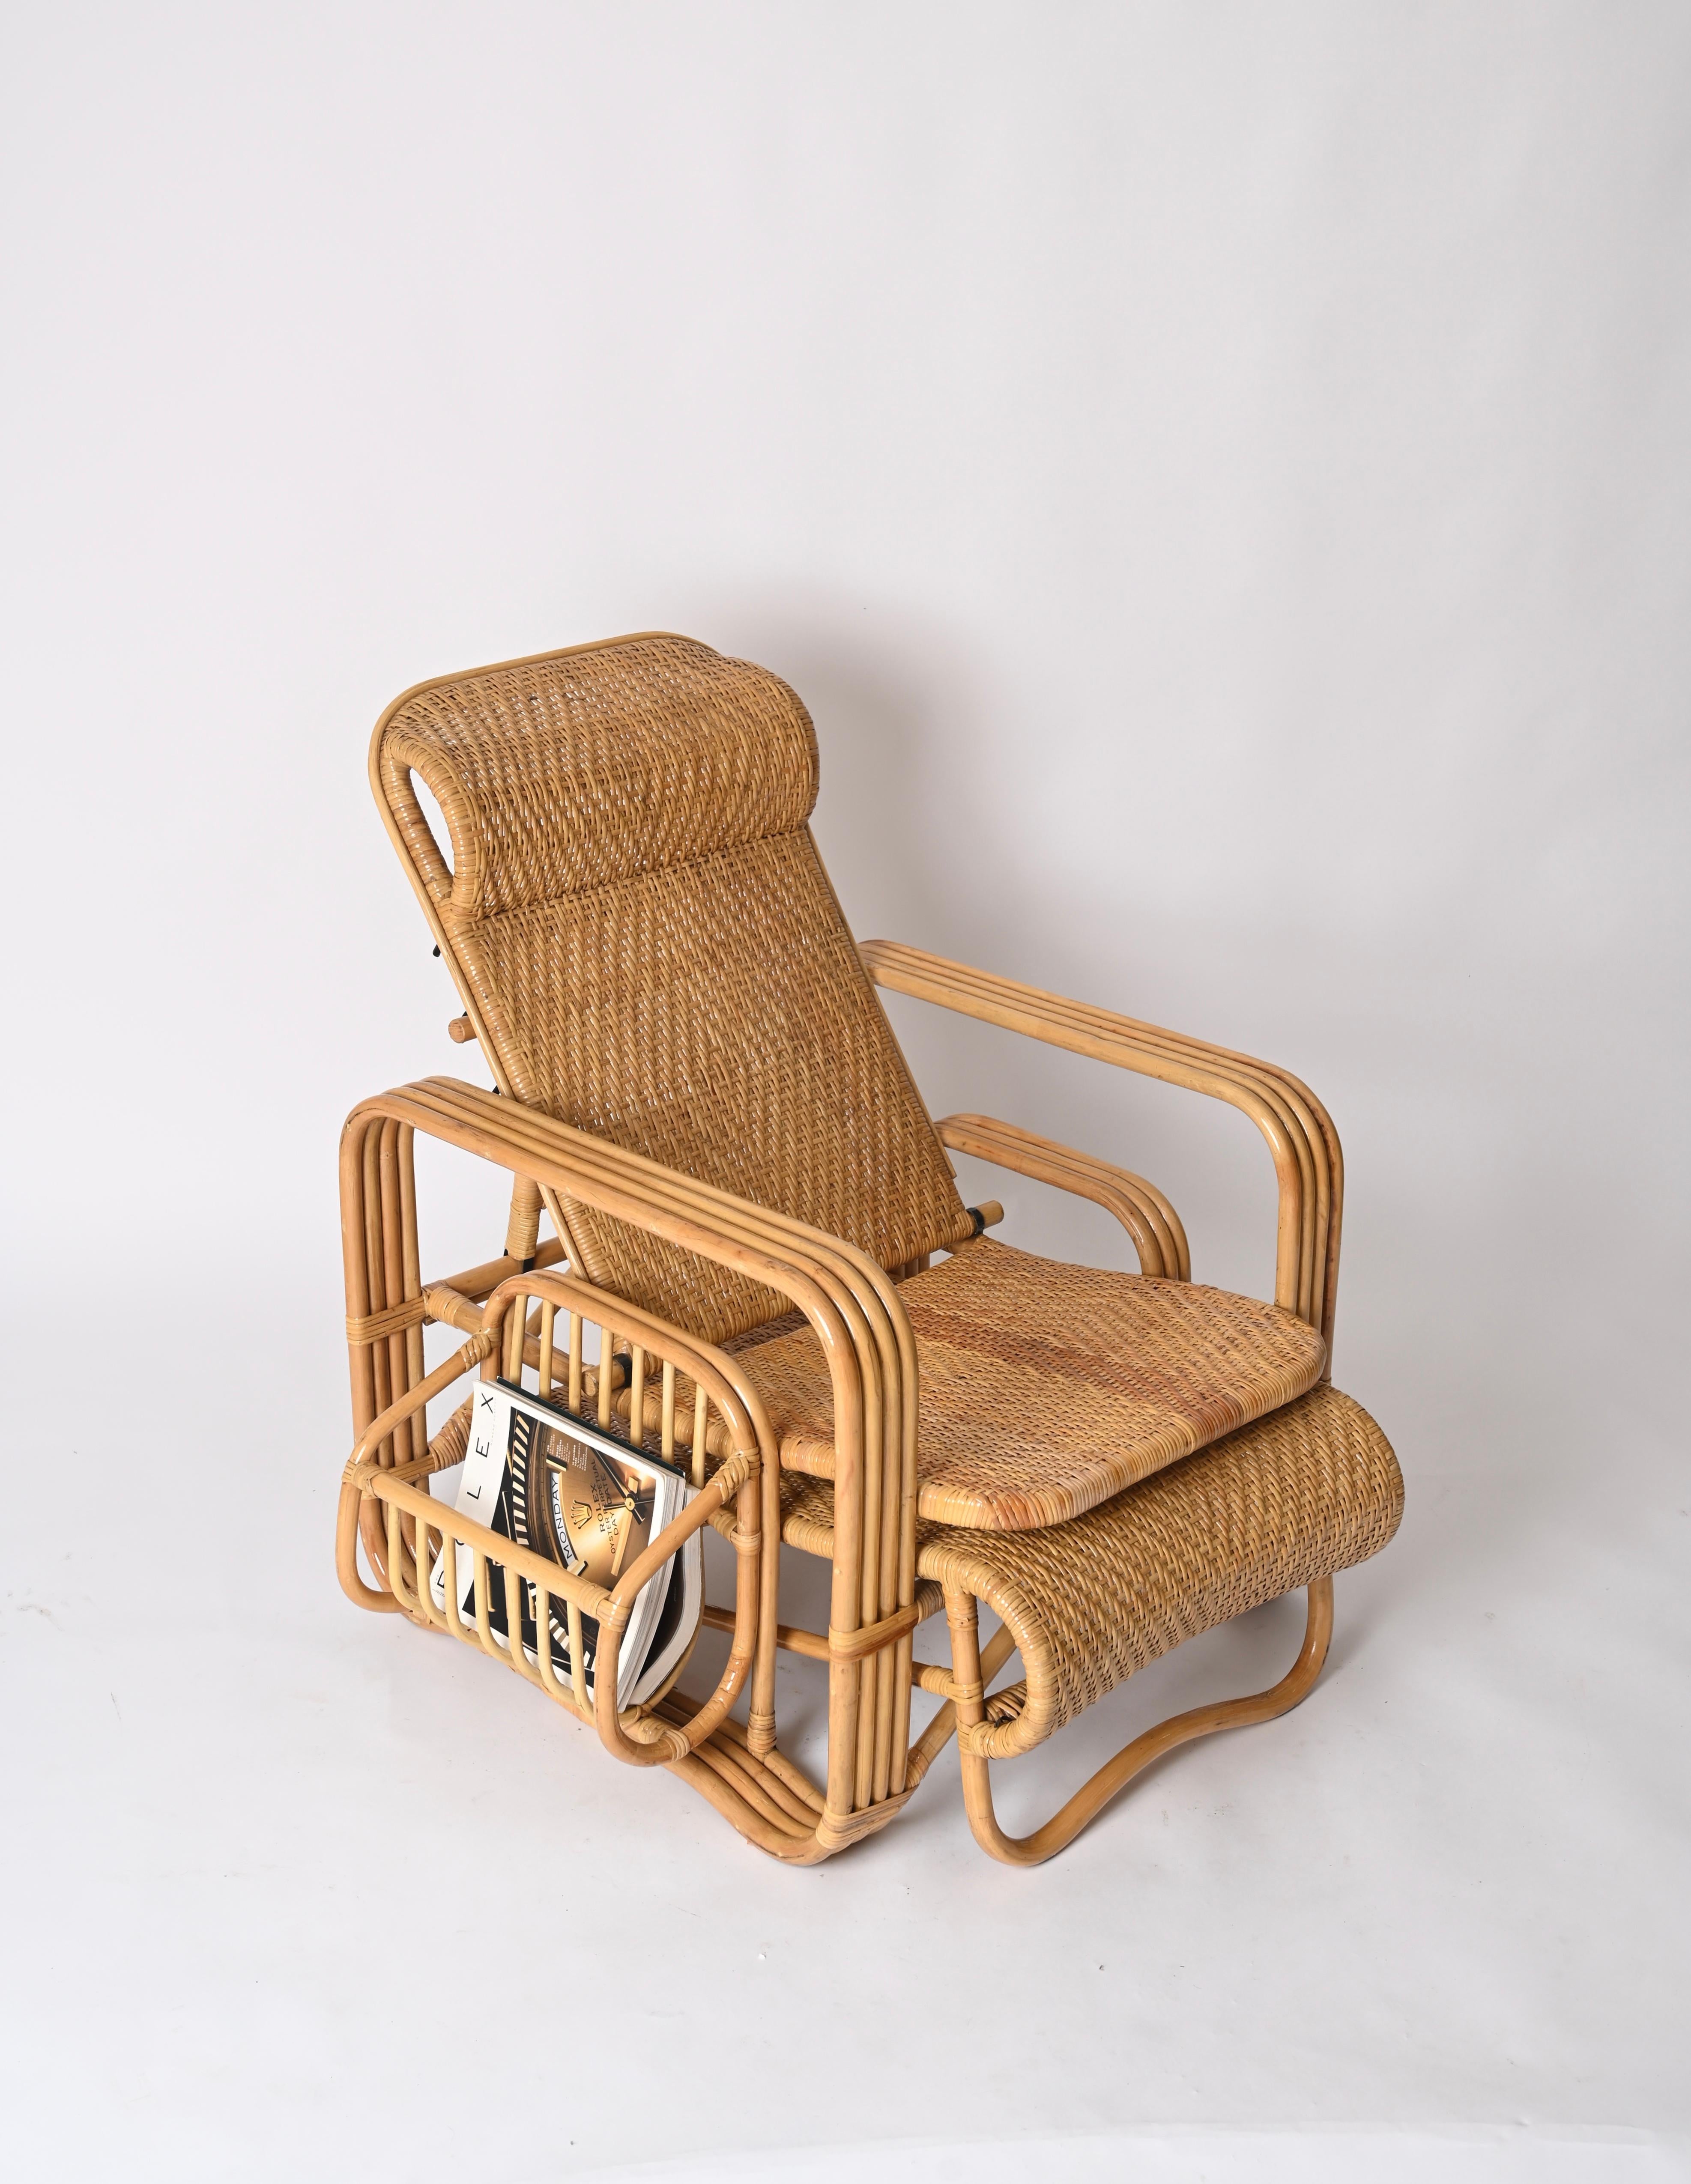 Spectacular reclinable armchair / lounge chair fully made in curved bamboo, rattan and hand-woven wicker.  This gorgeous lounge chairs was produced in Italy during the 1970s and are attributed to the mastery of Vivai del Sud.

This amazing French